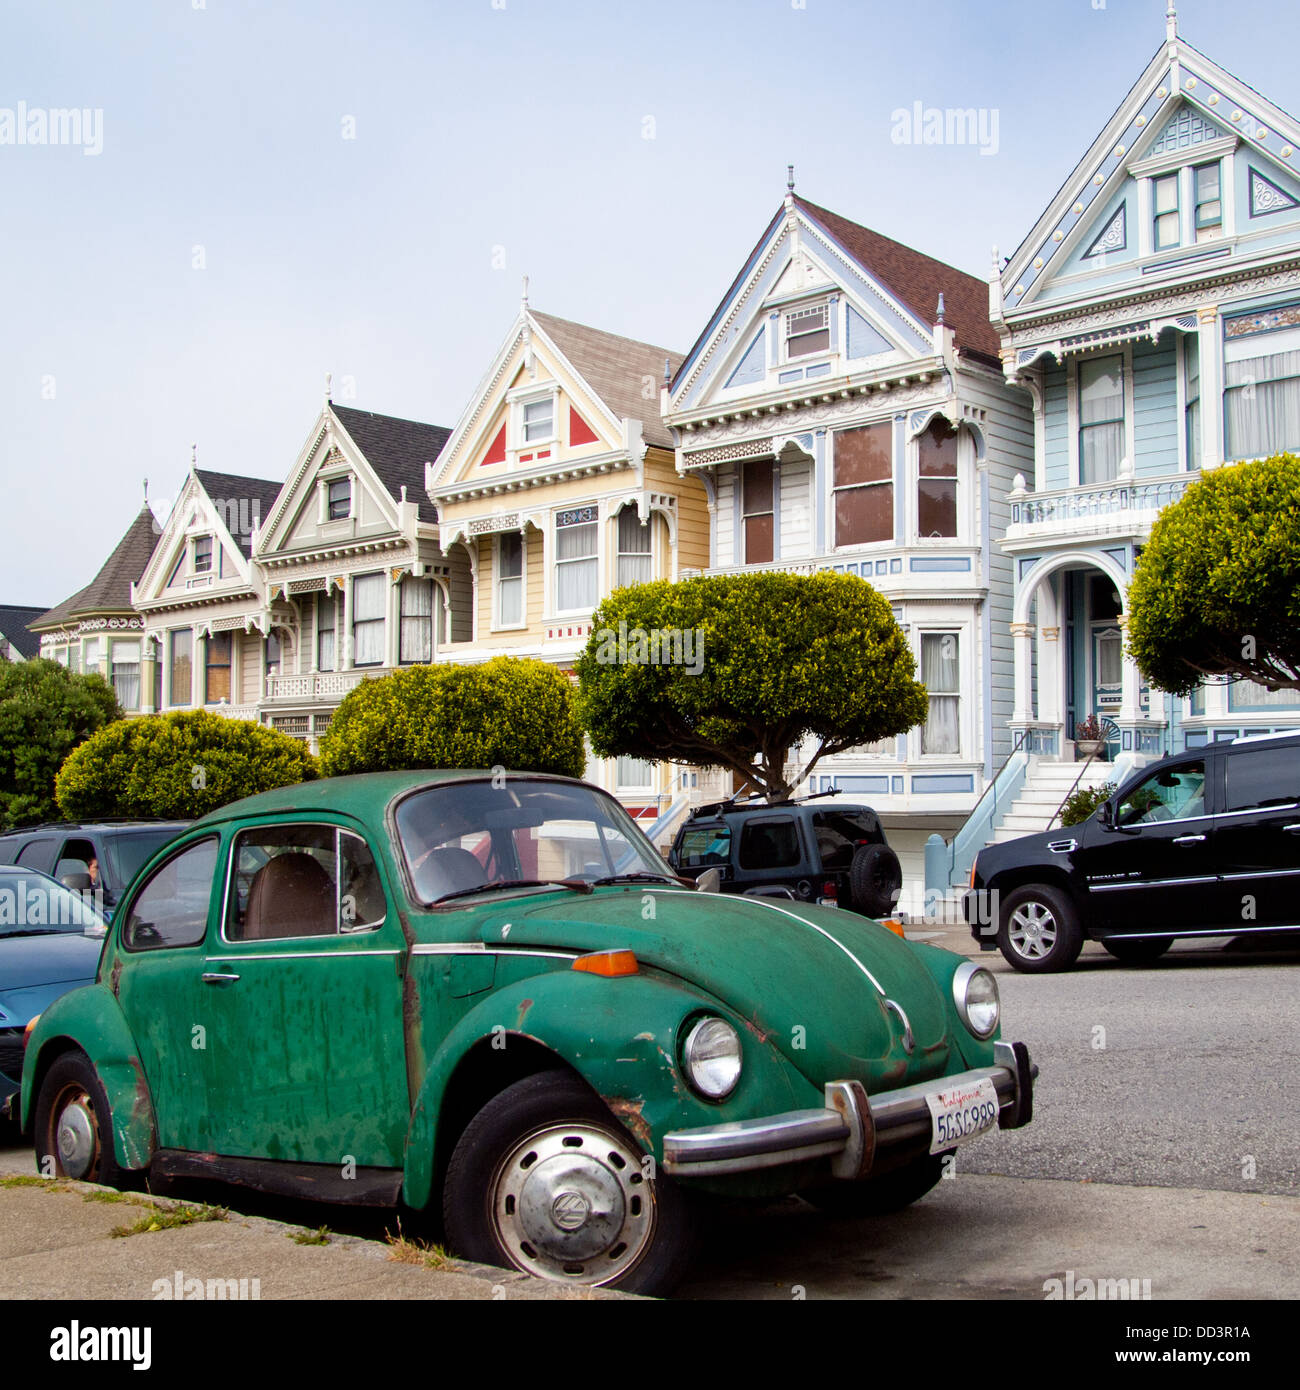 A vintage Volkswagen Beetle, parked in front of the famous 'Painted Ladies' of Steiner Street at Alamo Square in San Francisco. Stock Photo